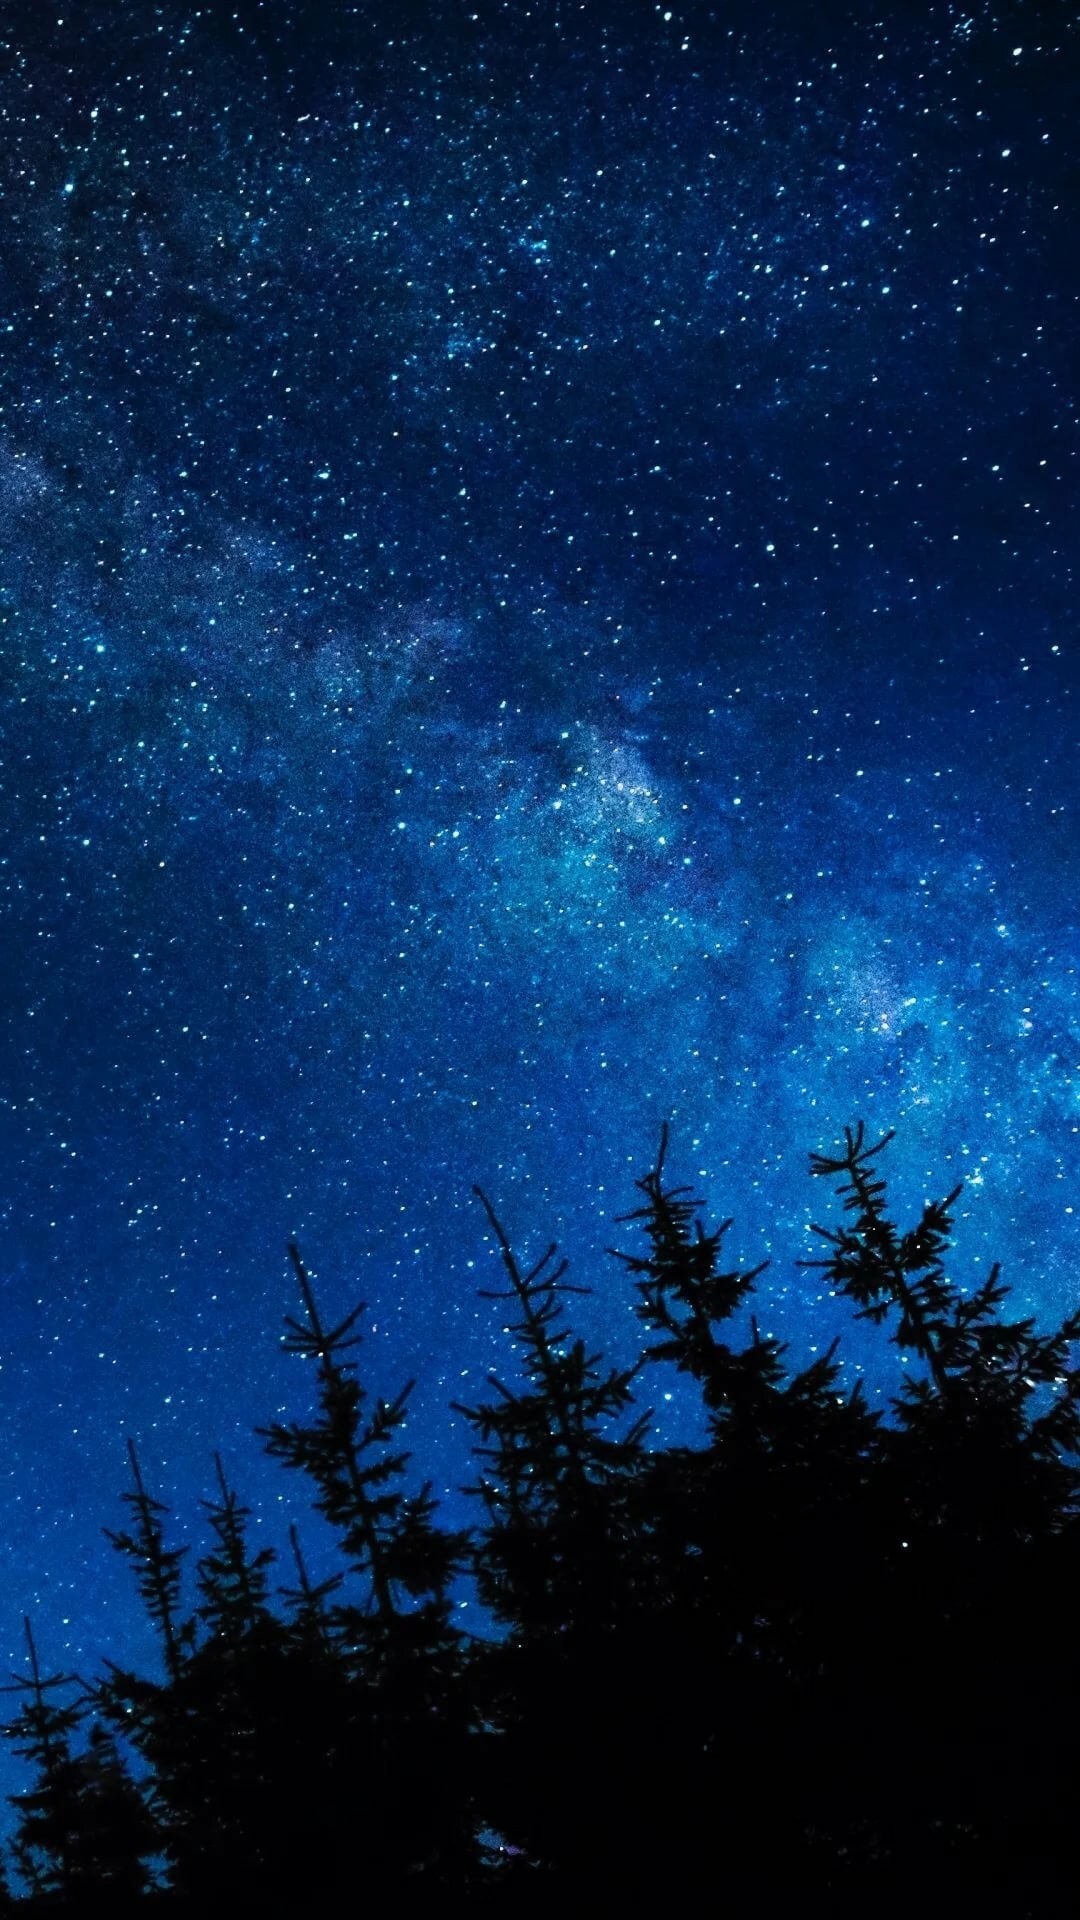 Starry Sky wallpaper for iphone